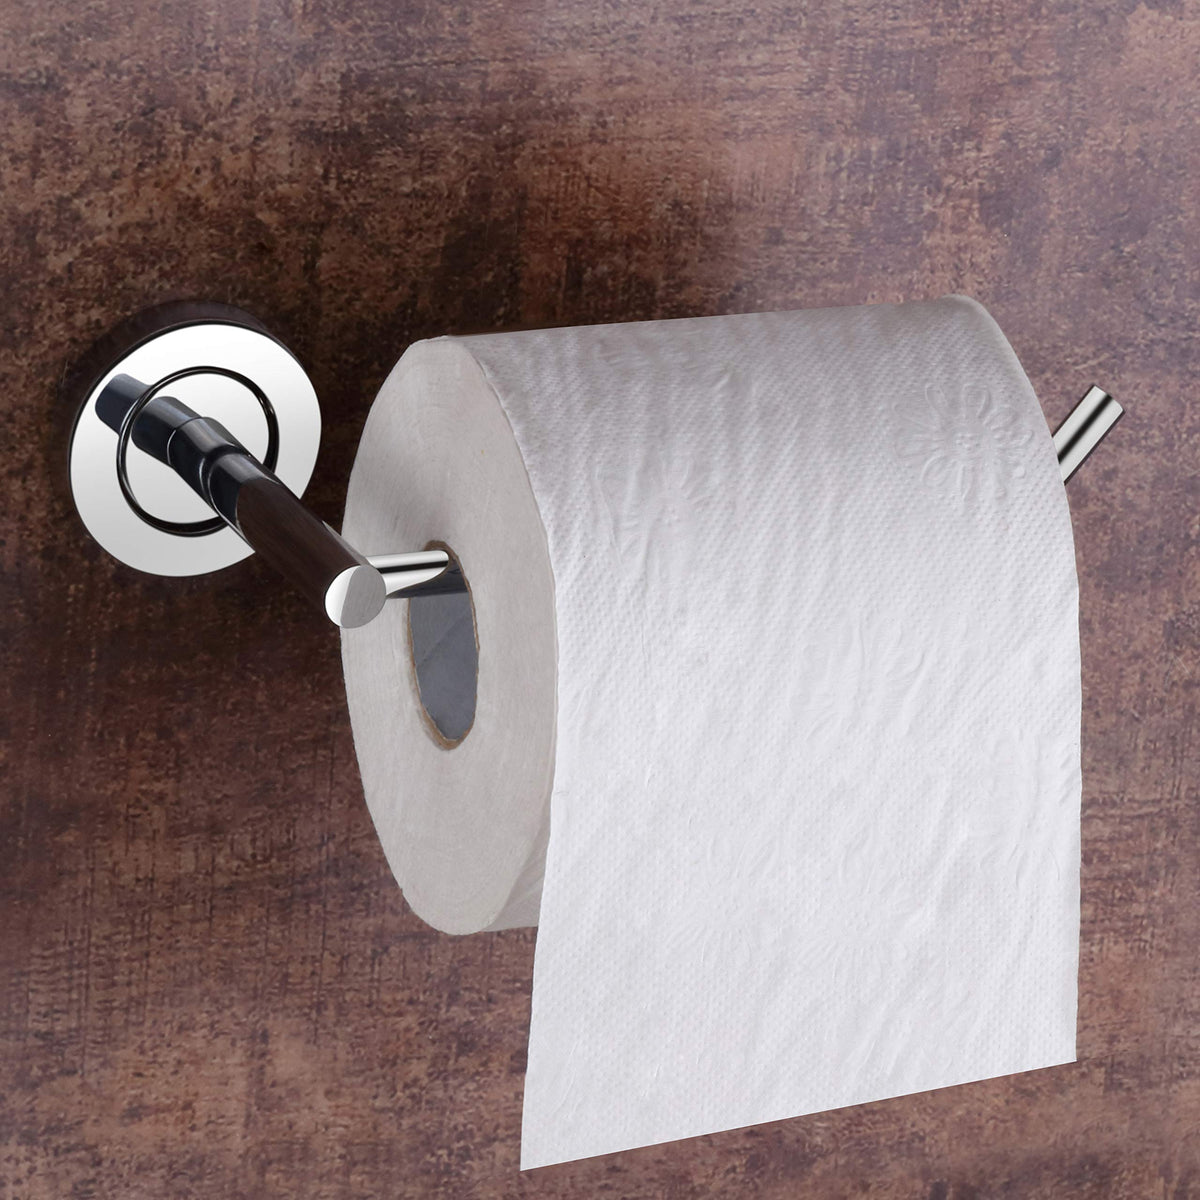 Plantex Stainless Steel Toilet Paper Roll Holder/Toilet Paper Holder in Bathroom/Kitchen/Bathroom Accessories (Chrome)